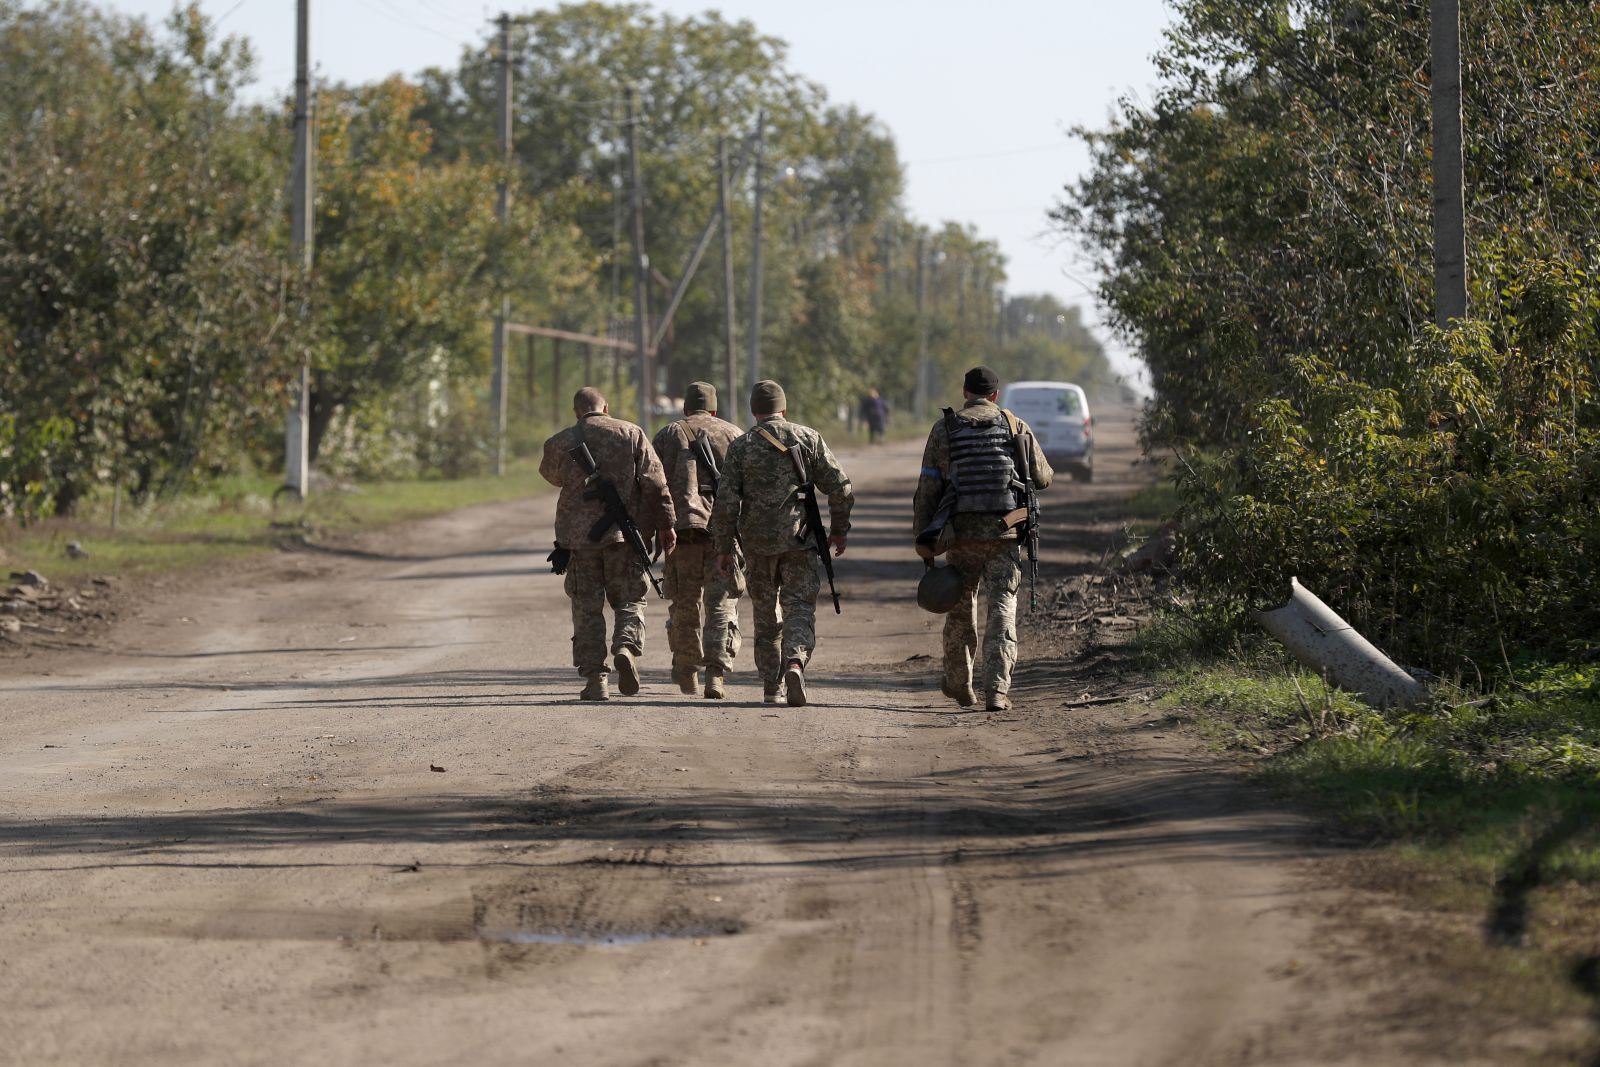 epa10229457 Ukrainian soldier patrol in the village of Pesky-Radkivski about 150km east of Kharkiv, Ukraine, 07 October 2022. The Ukrainian army pushed Russian troops from occupied territory in the northeast of the country in a counterattack. Kharkiv and surrounding areas have been the target of heavy shelling since February 2022, when Russian troops entered Ukraine starting a conflict that has provoked destruction and a humanitarian crisis.  EPA/ATEF SAFADI